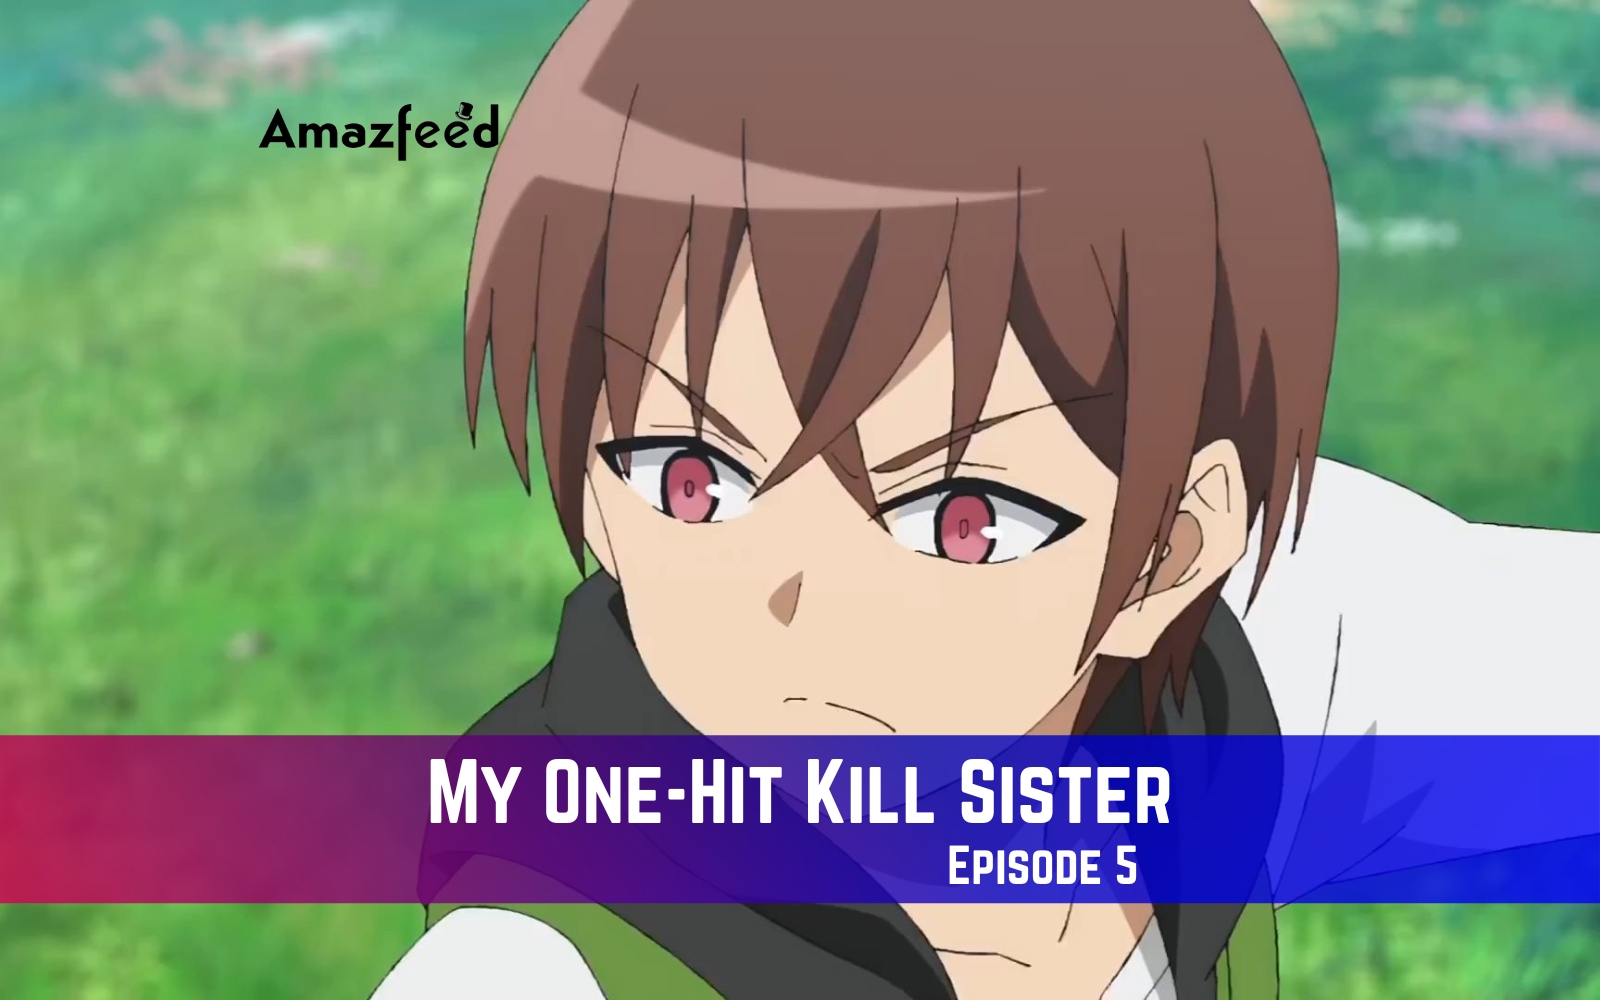 My One-Hit Kill Sister episode 5 Release Date